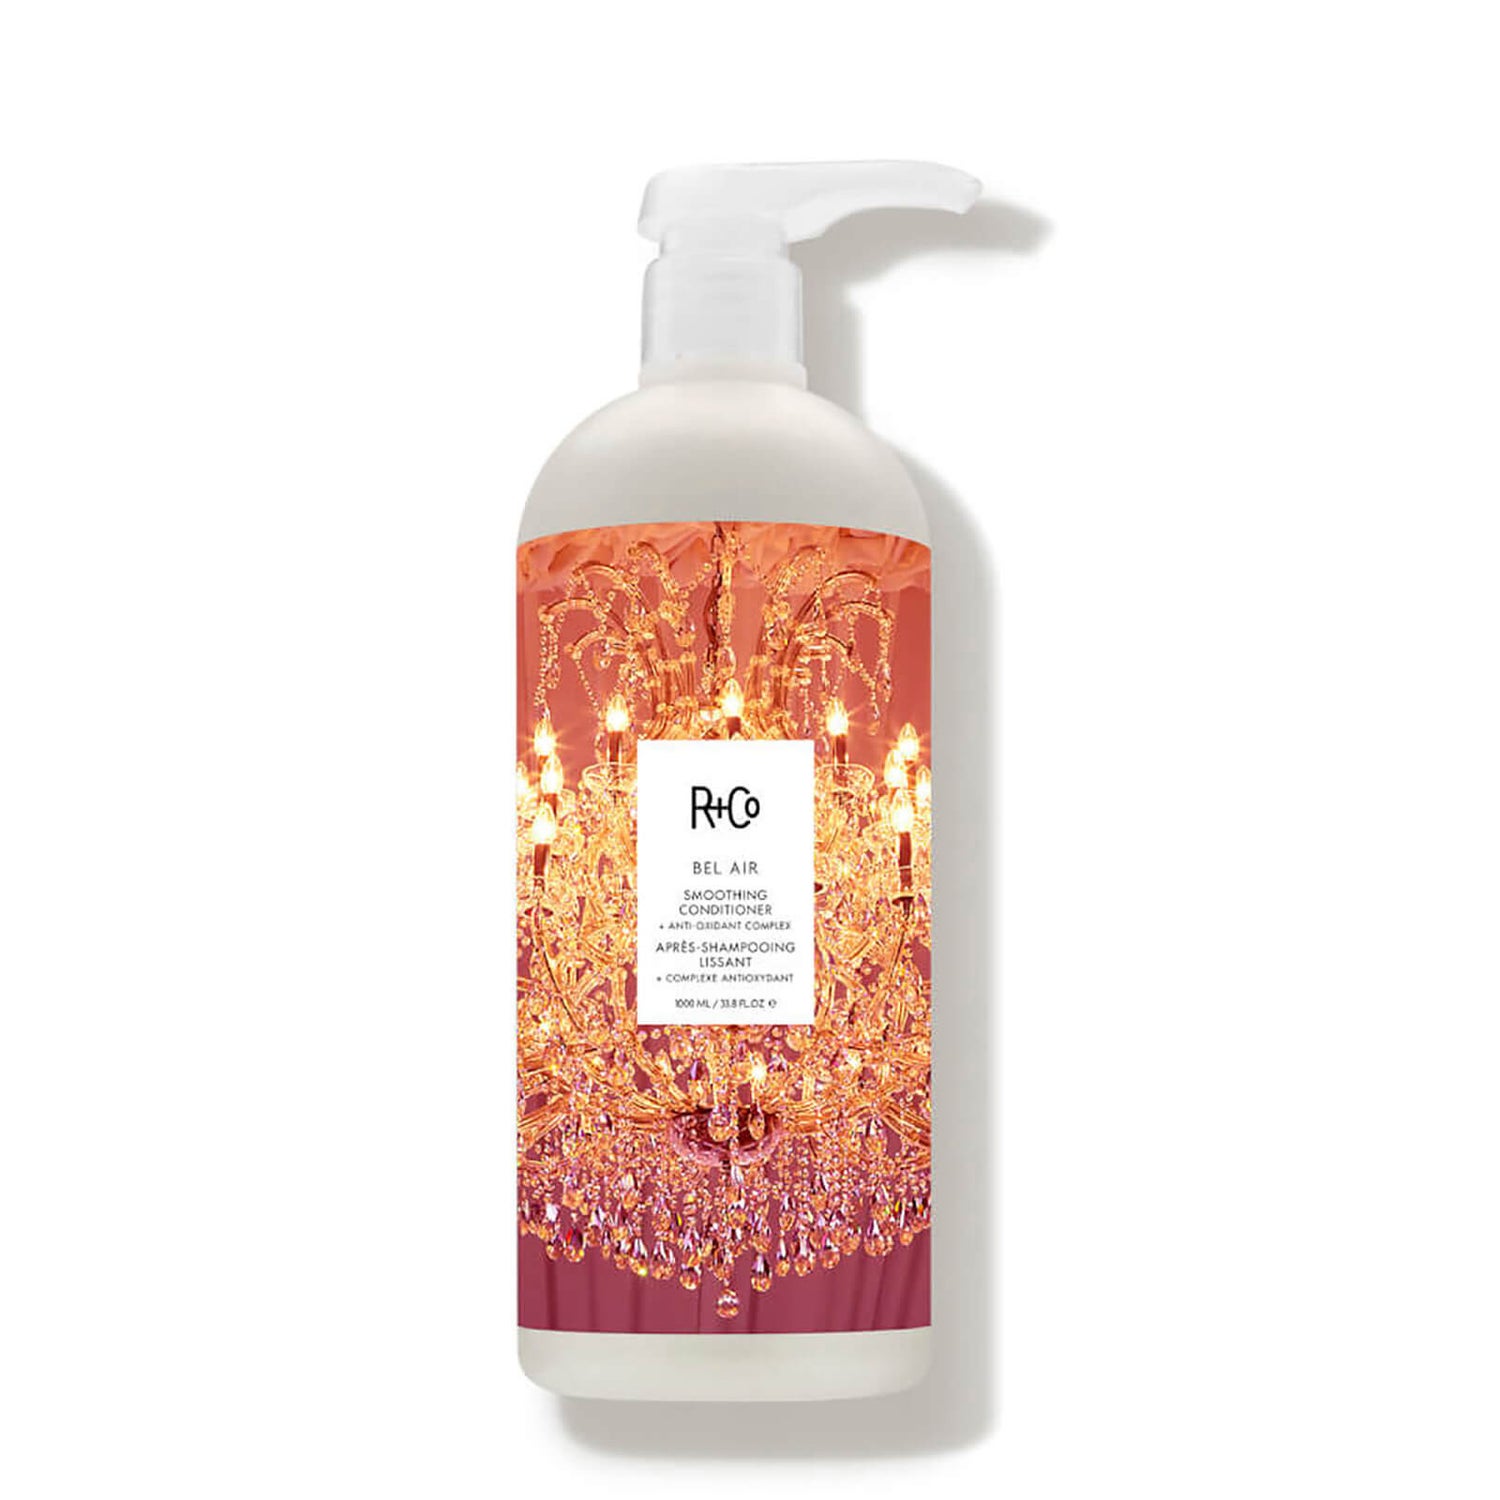 R+Co Bel Air Smoothing Conditioner Anti-Oxidant Complex (Various Sizes)